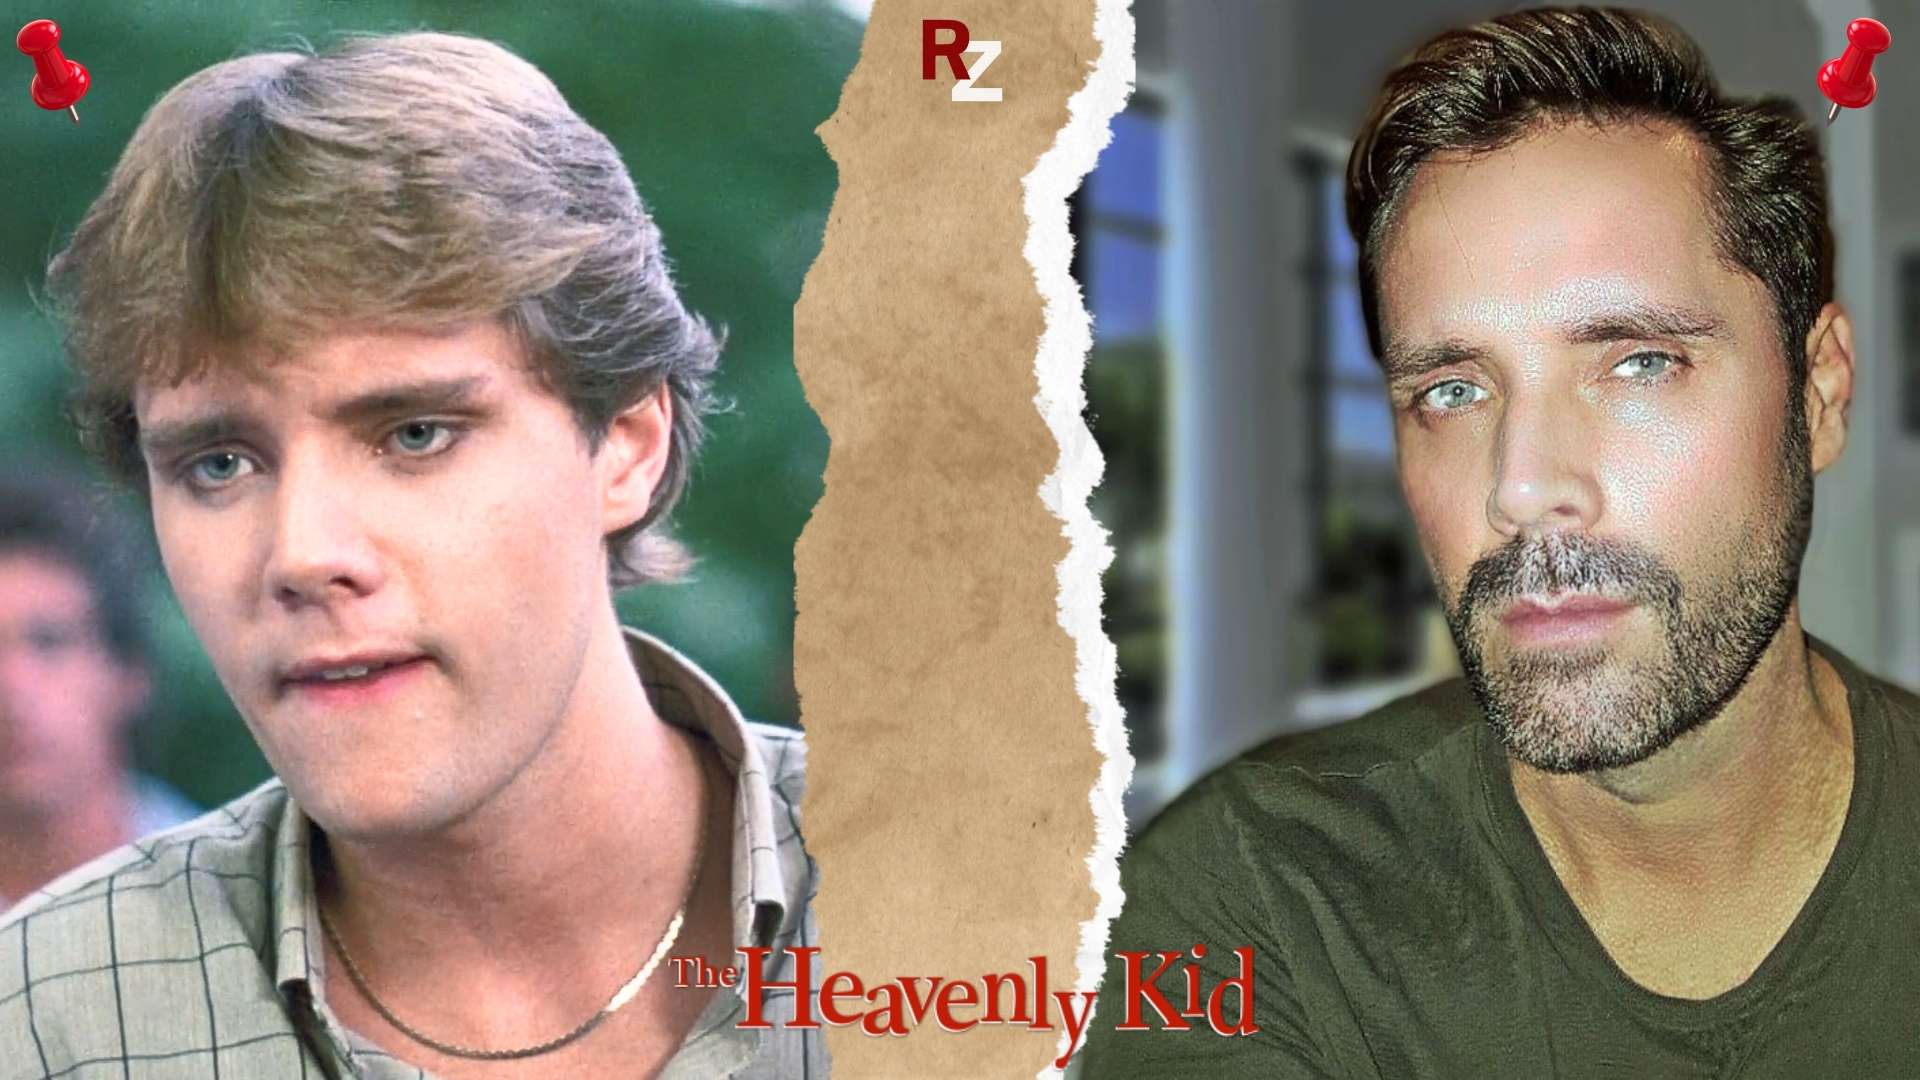 The Heavenly Kid (1985) Cast: Then and Now